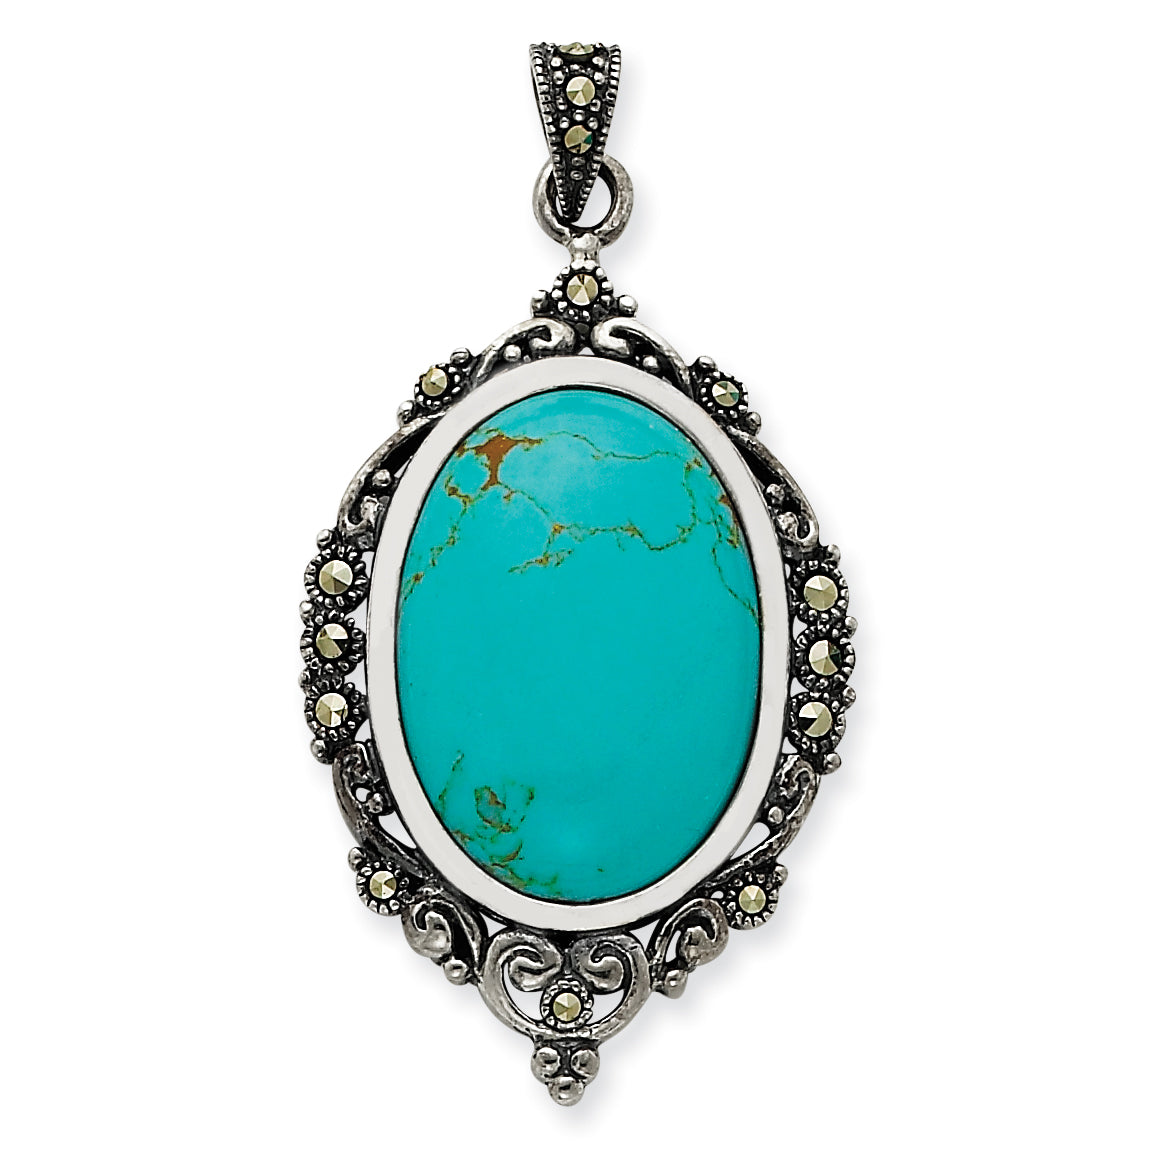 Sterling Silver Marcasite Turquoise Pendant